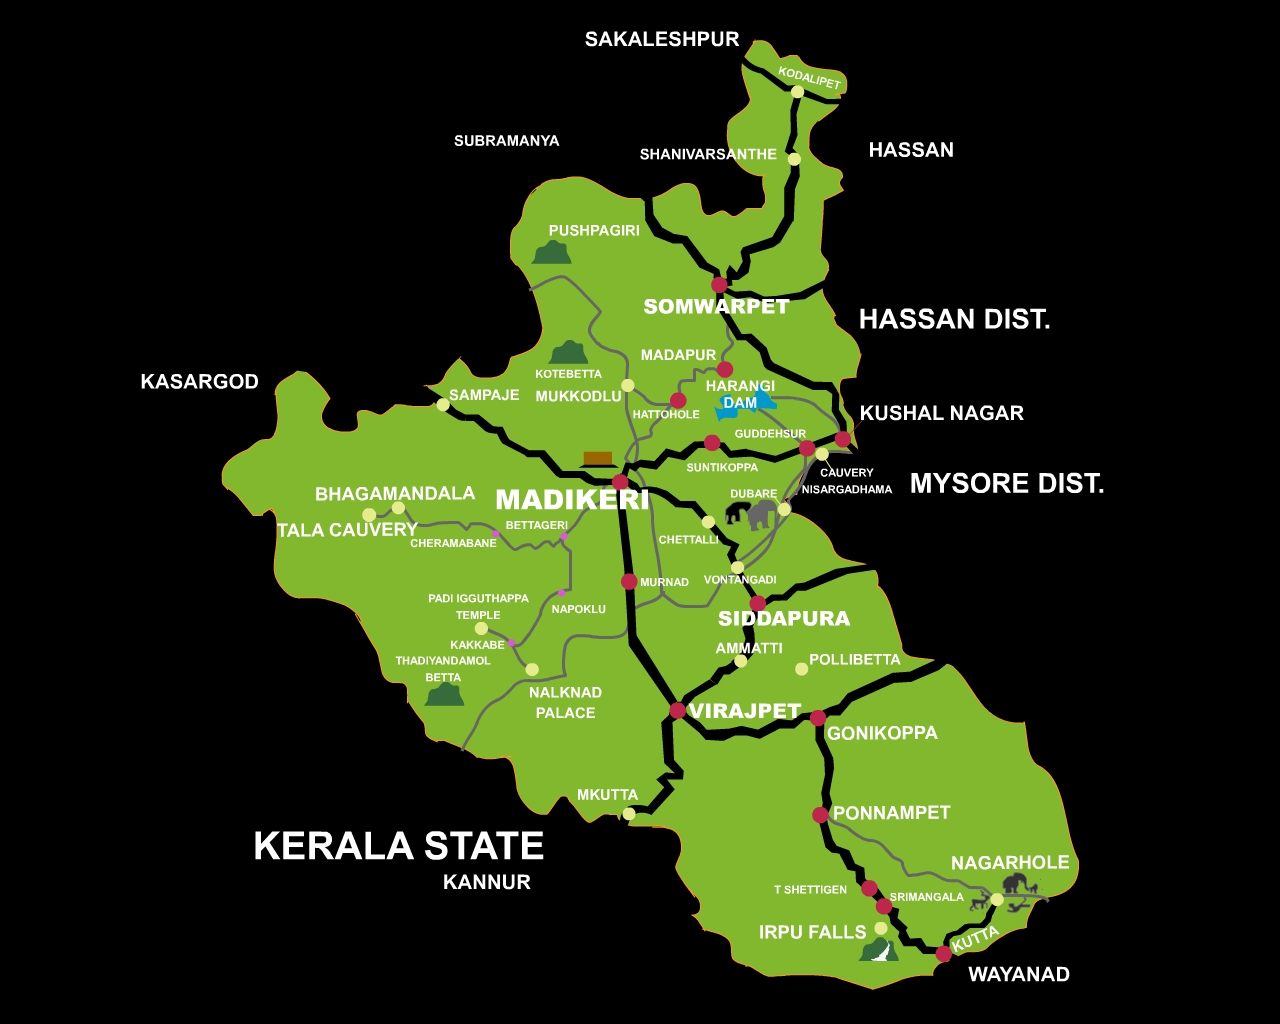 coorg tourist map with distance